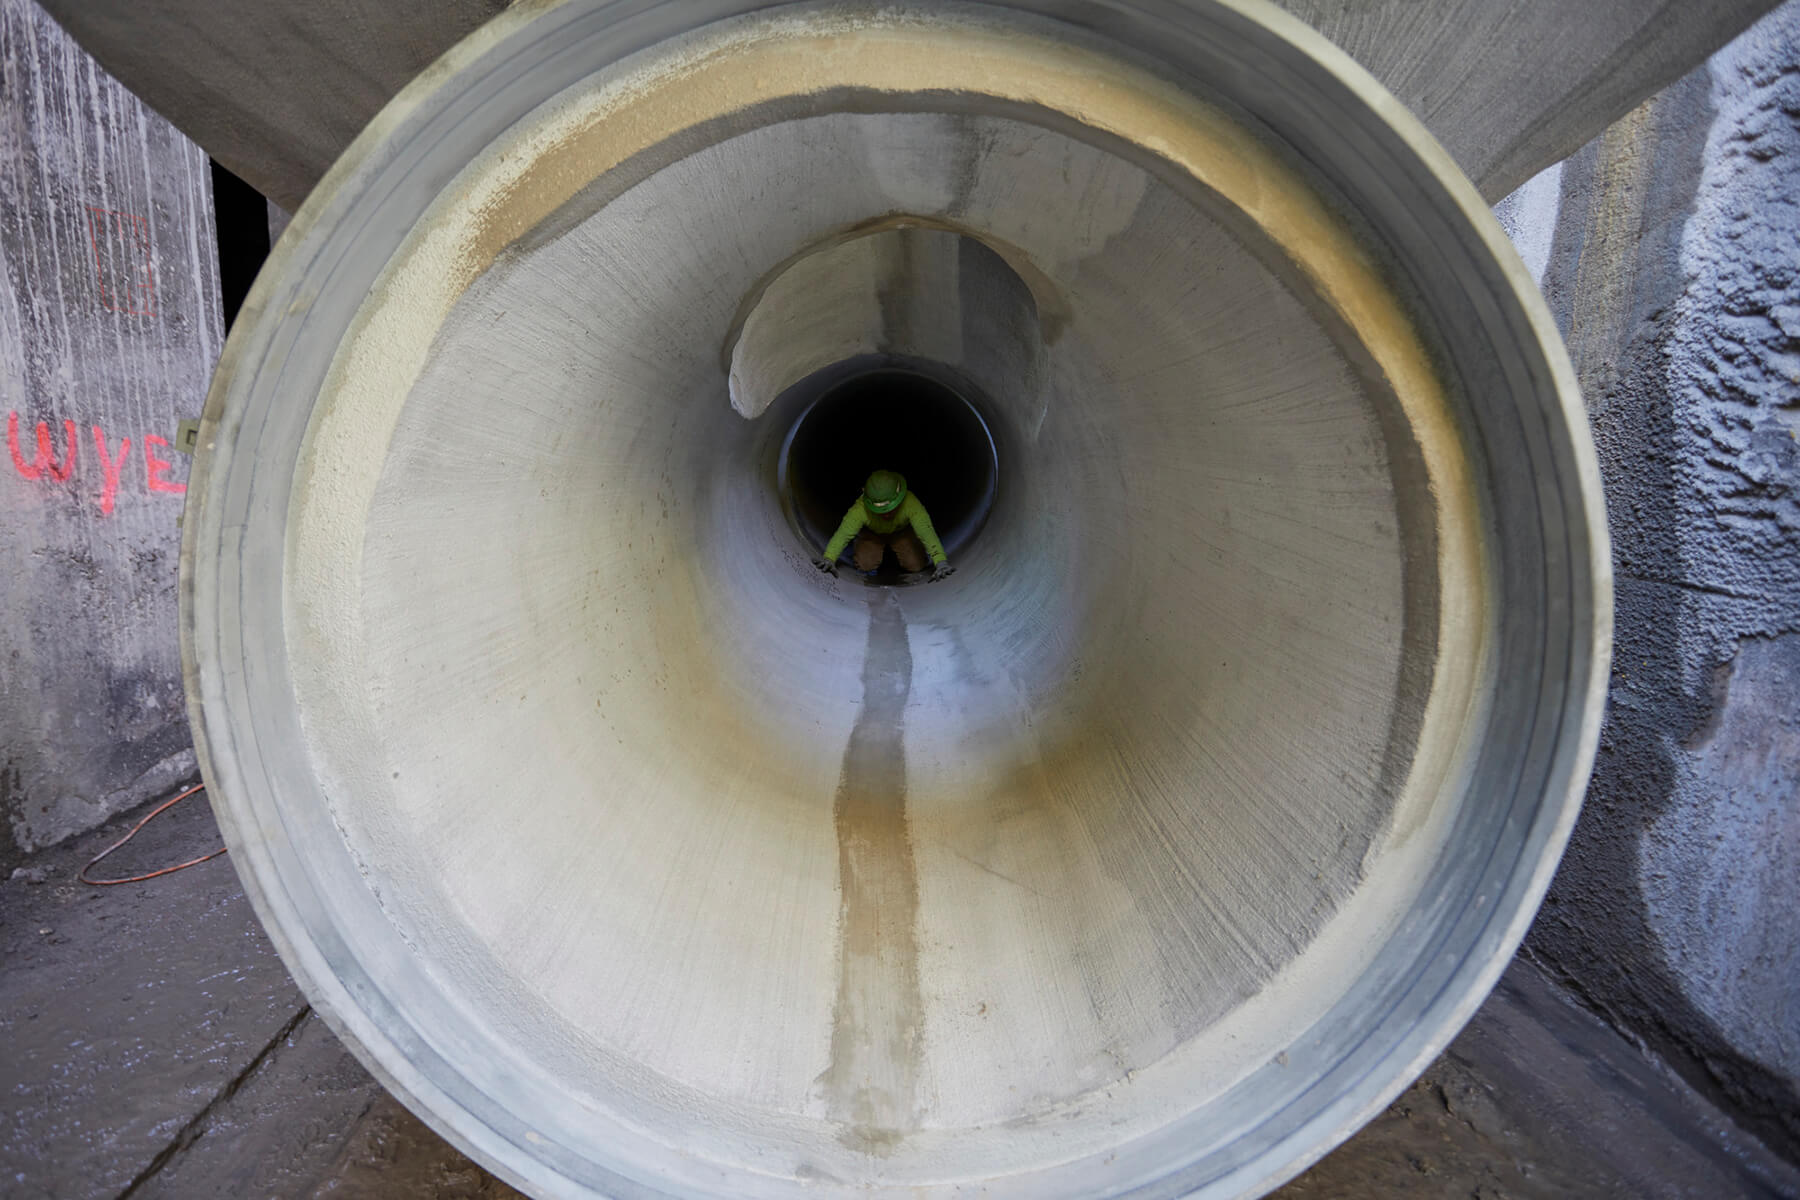 Worker in concrete cylinder pipe as seen from a distance.